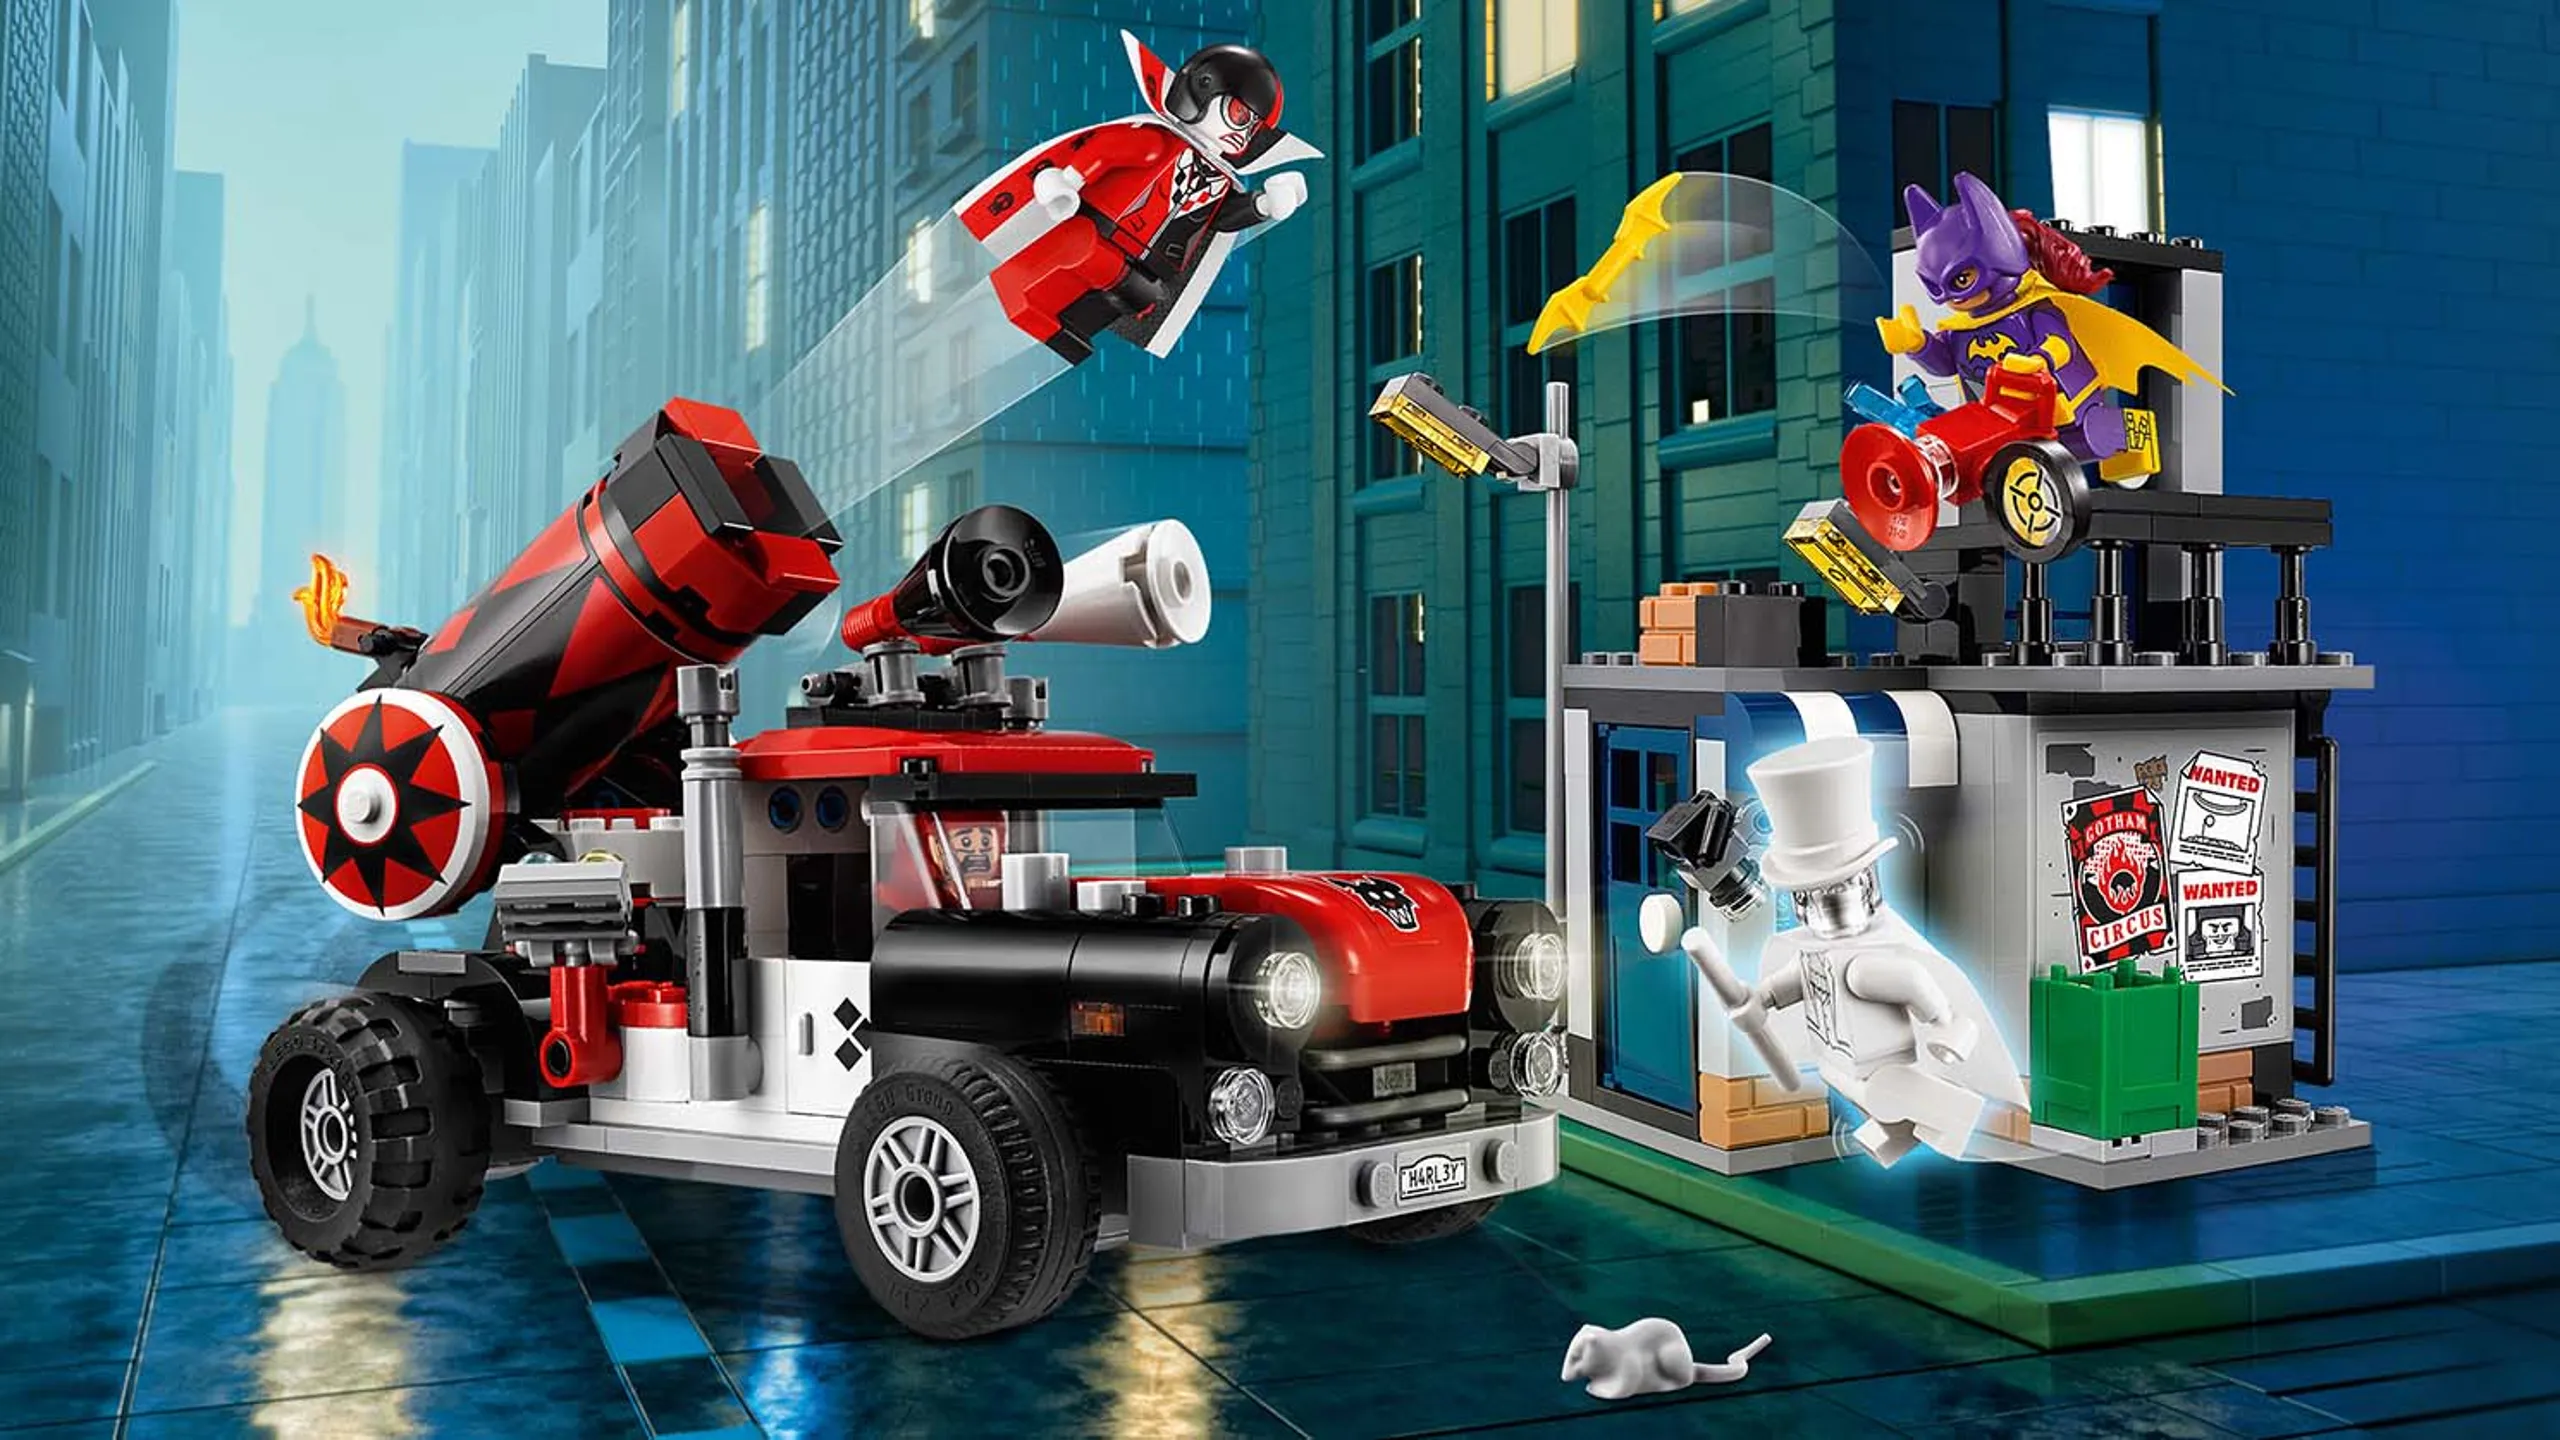 LEGO Batman Movie Harley Quinn Cannonball Attack - 70921 - Harley Quinn are using her cannon car to fight Batgirl, Crazy Quilt and Gentleman Ghost using herself as a cannonball